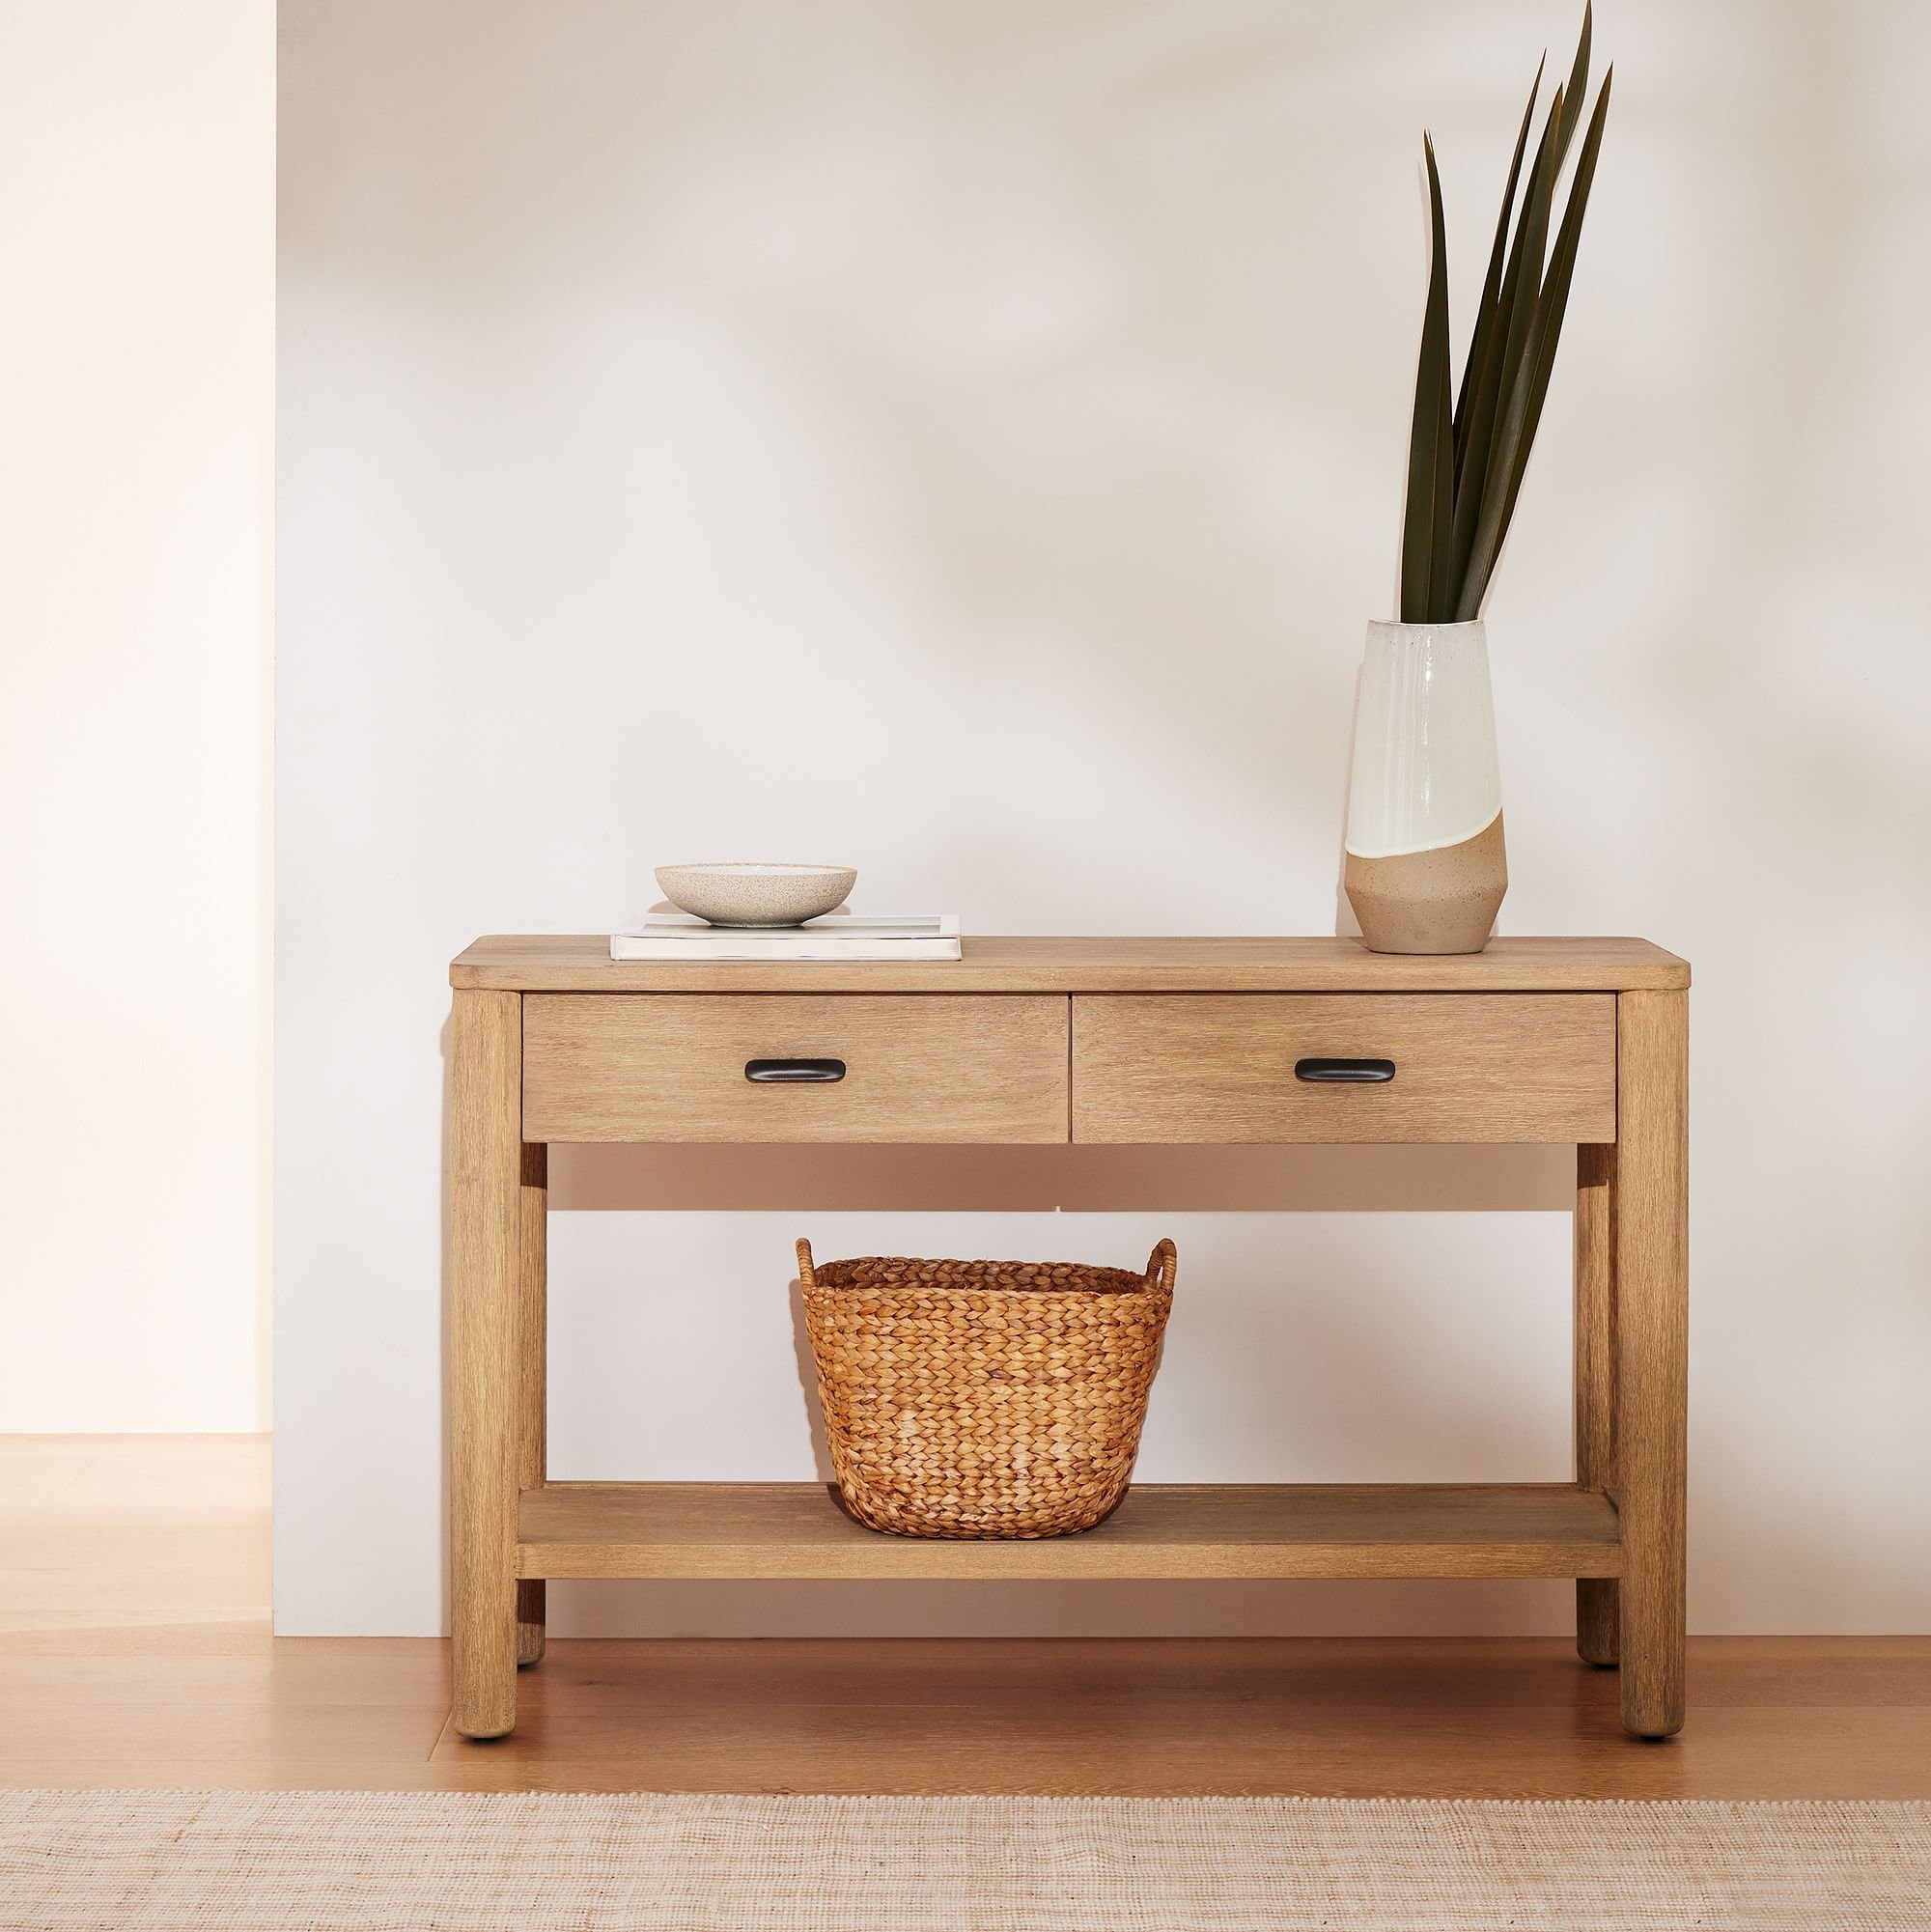 Hargrove Entry Console - $699 - West Elm